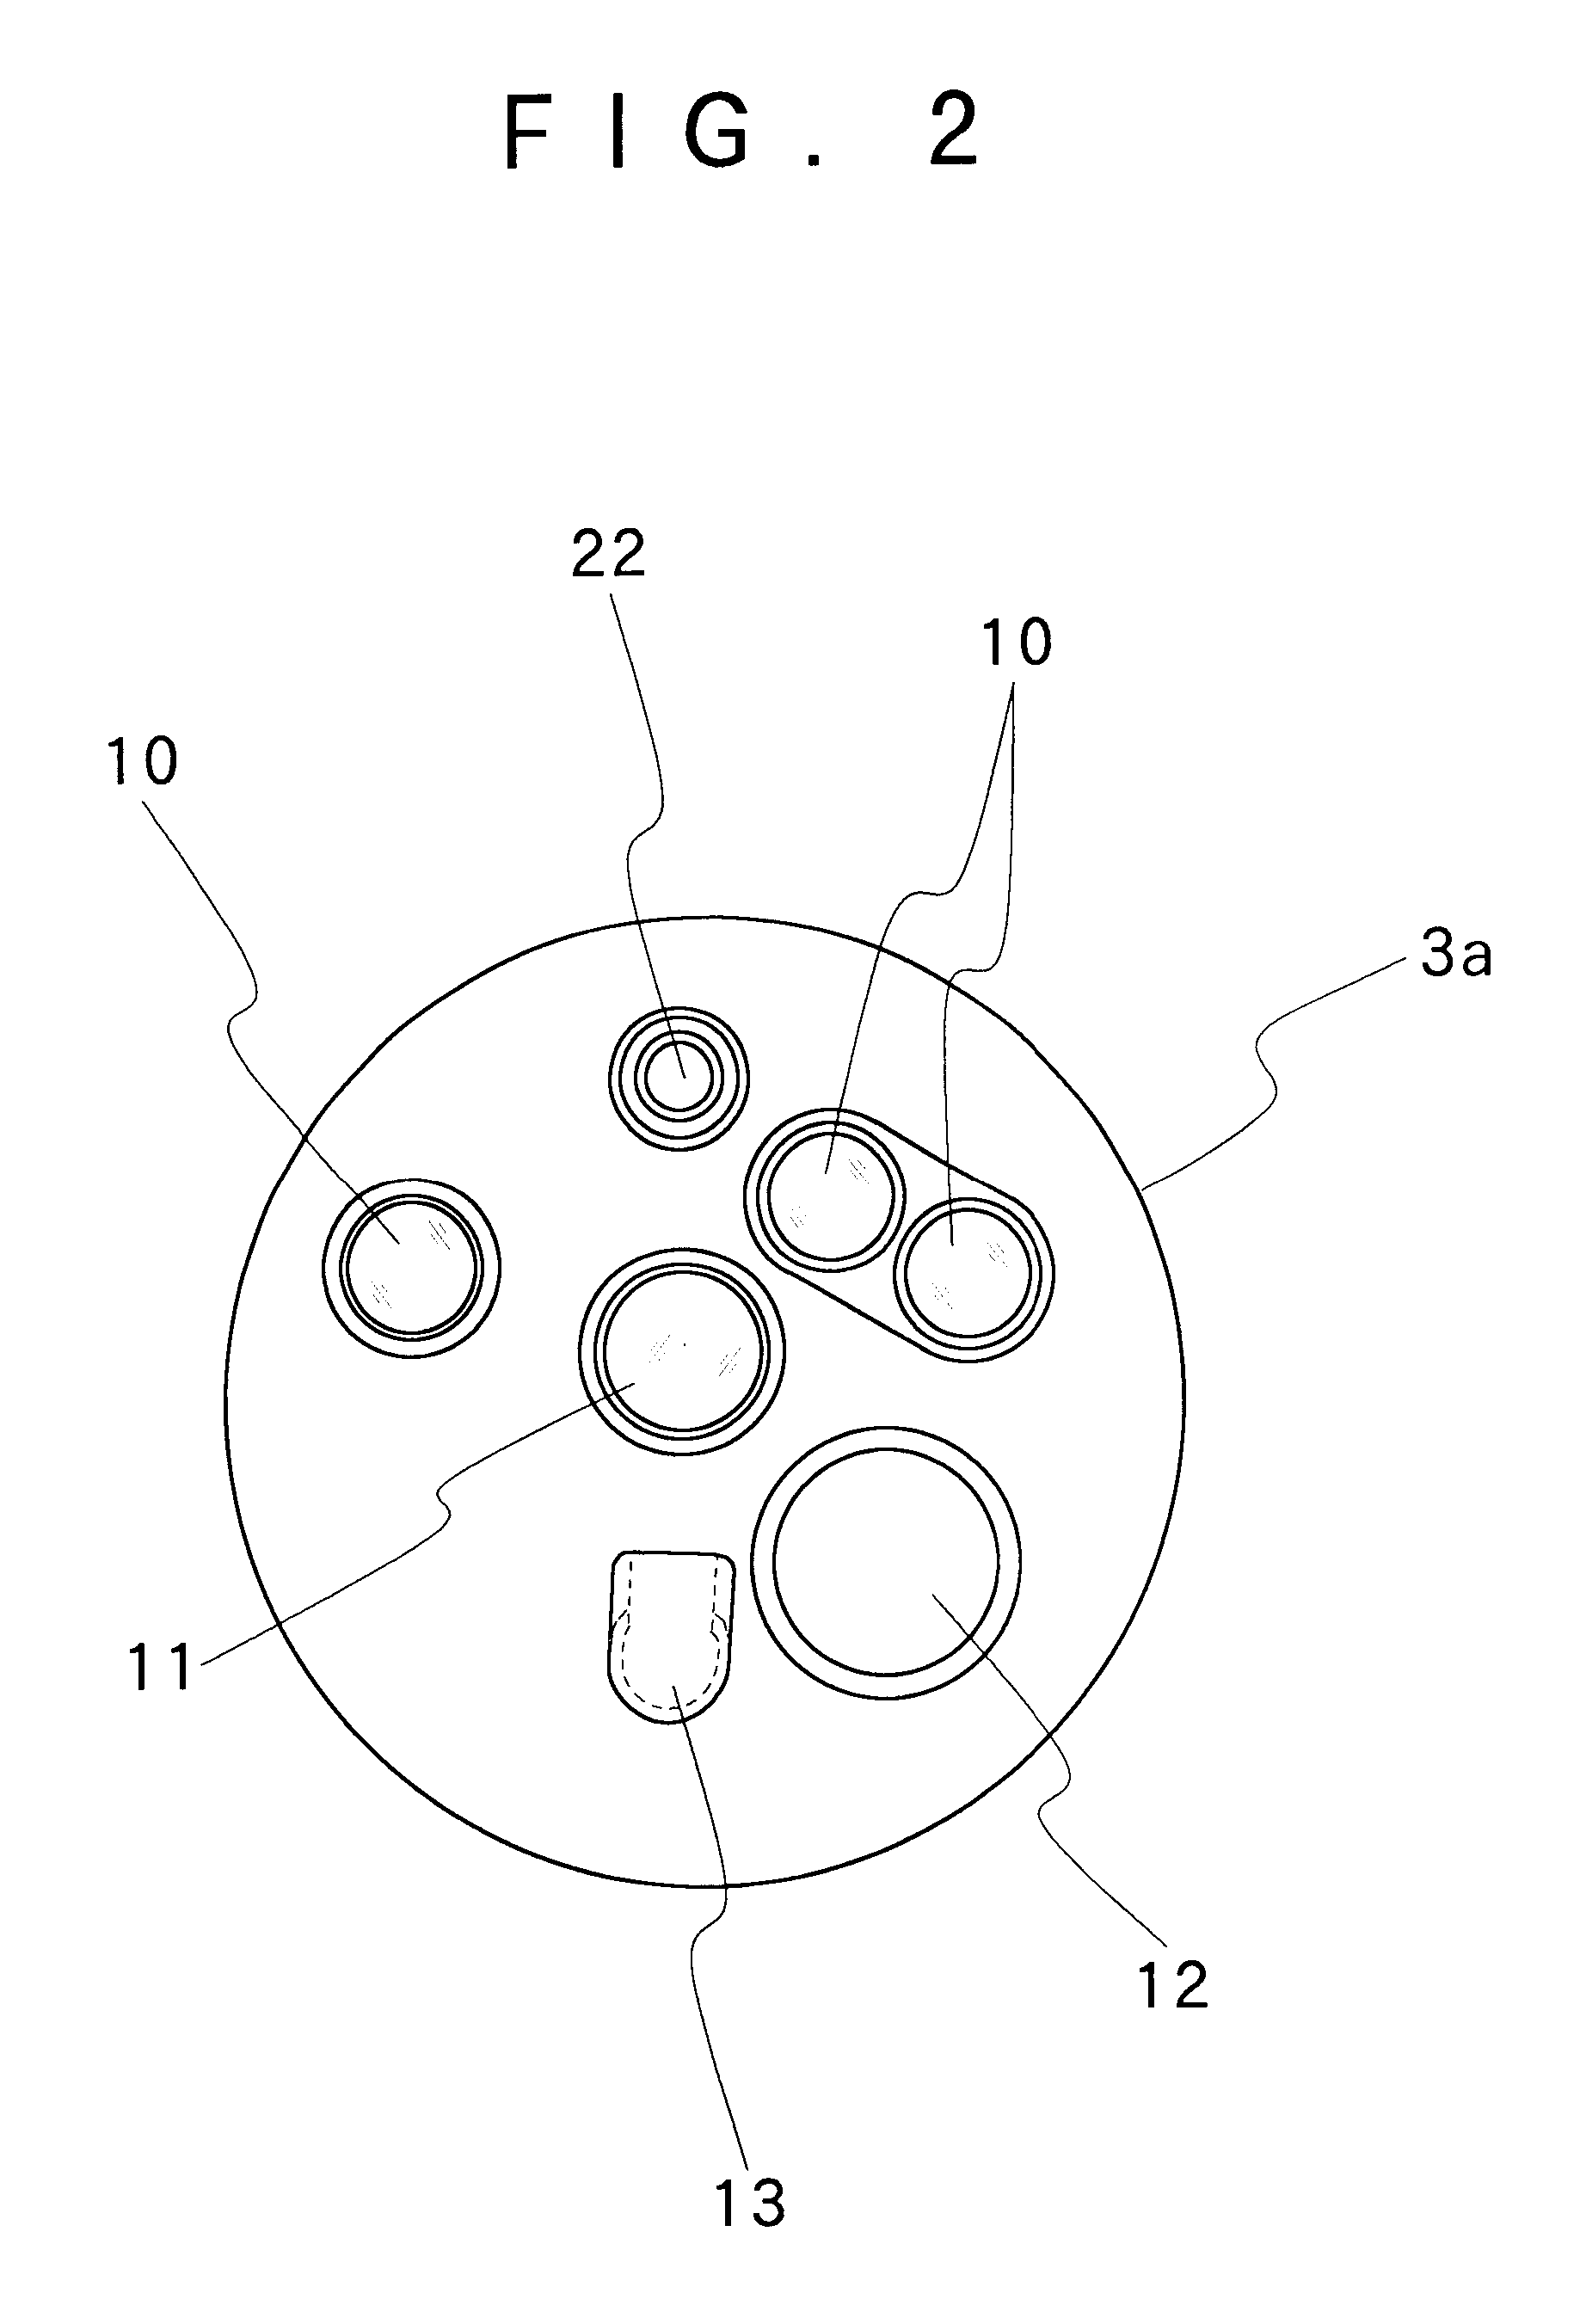 Endoscope with objective lens drive mechanism